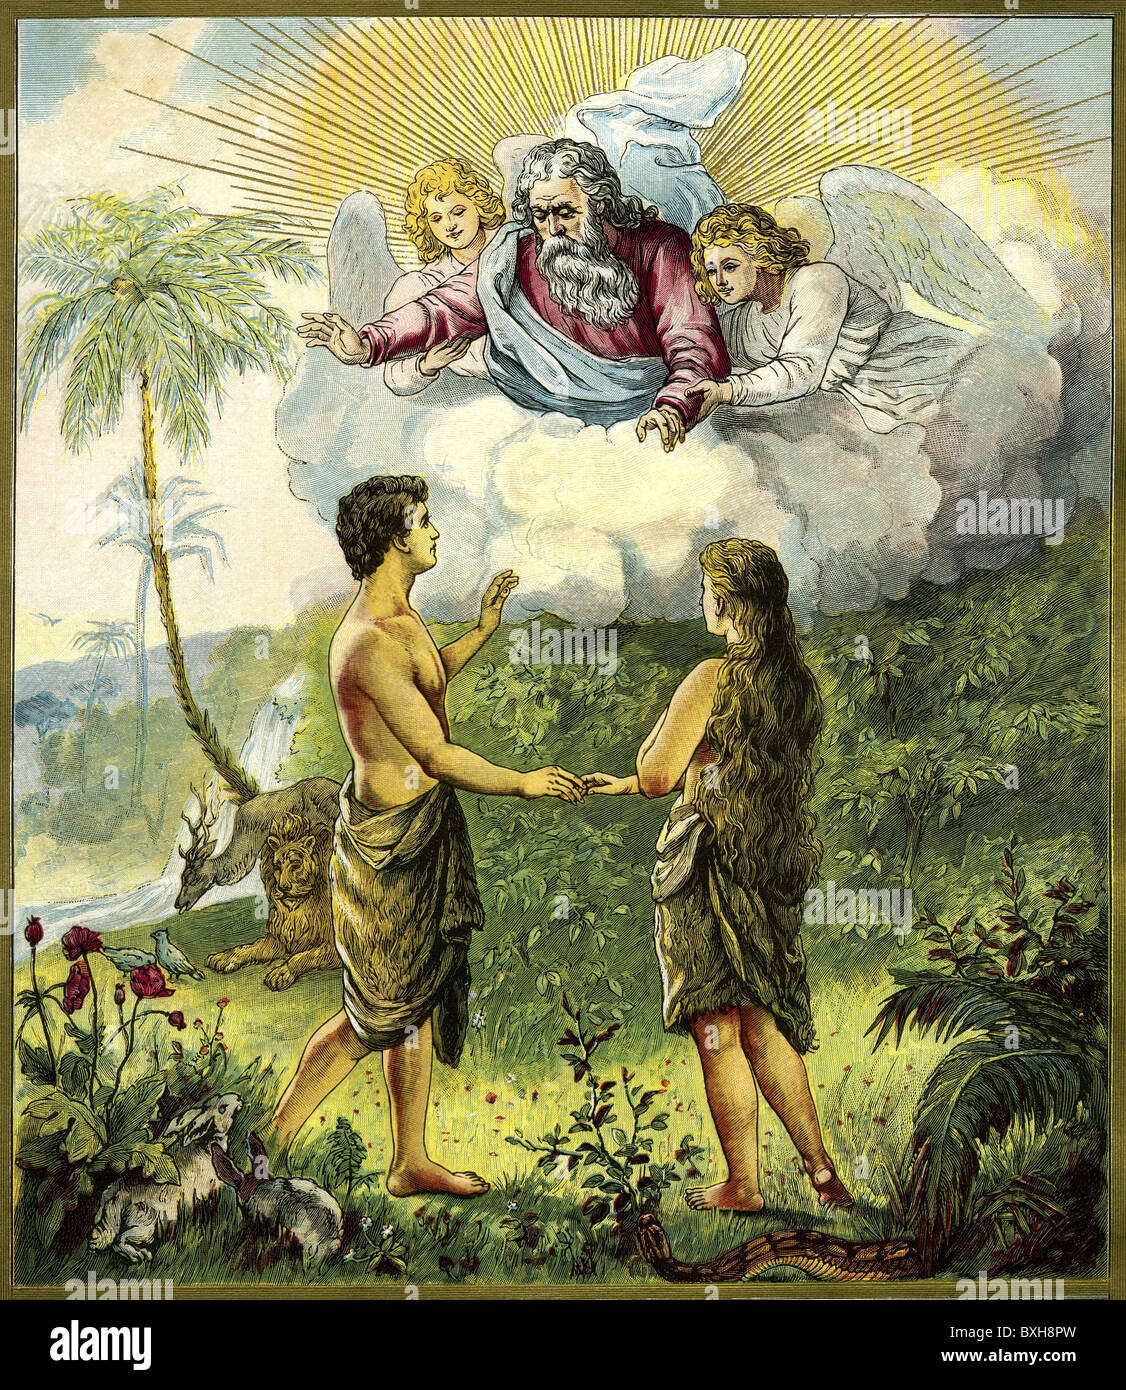 Collection 99+ Images adam and eve in the garden of eden Stunning